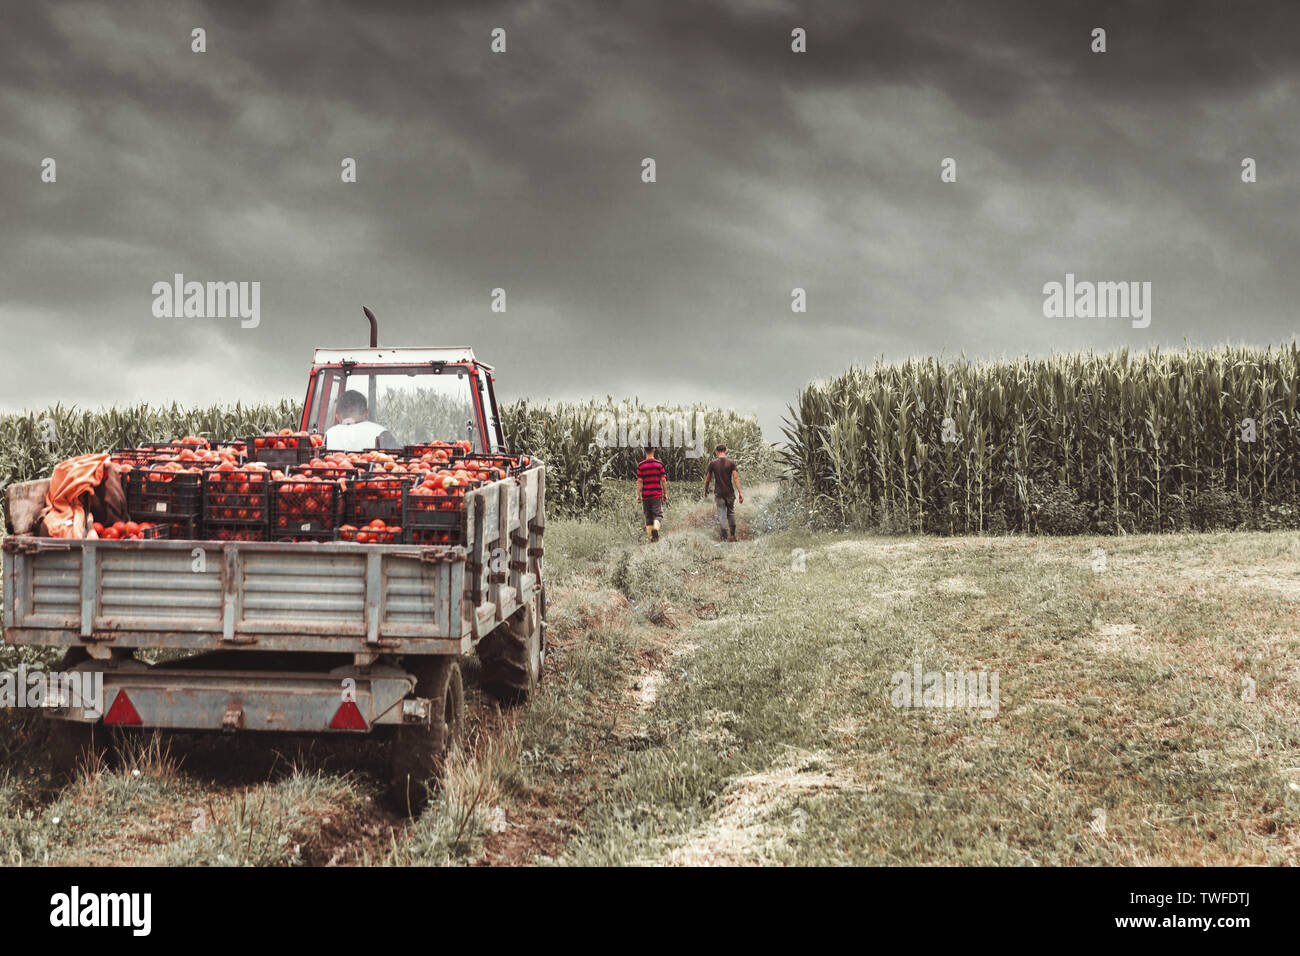 tractor charged with crates filled by red tomatoes to transport them to market Stock Photo